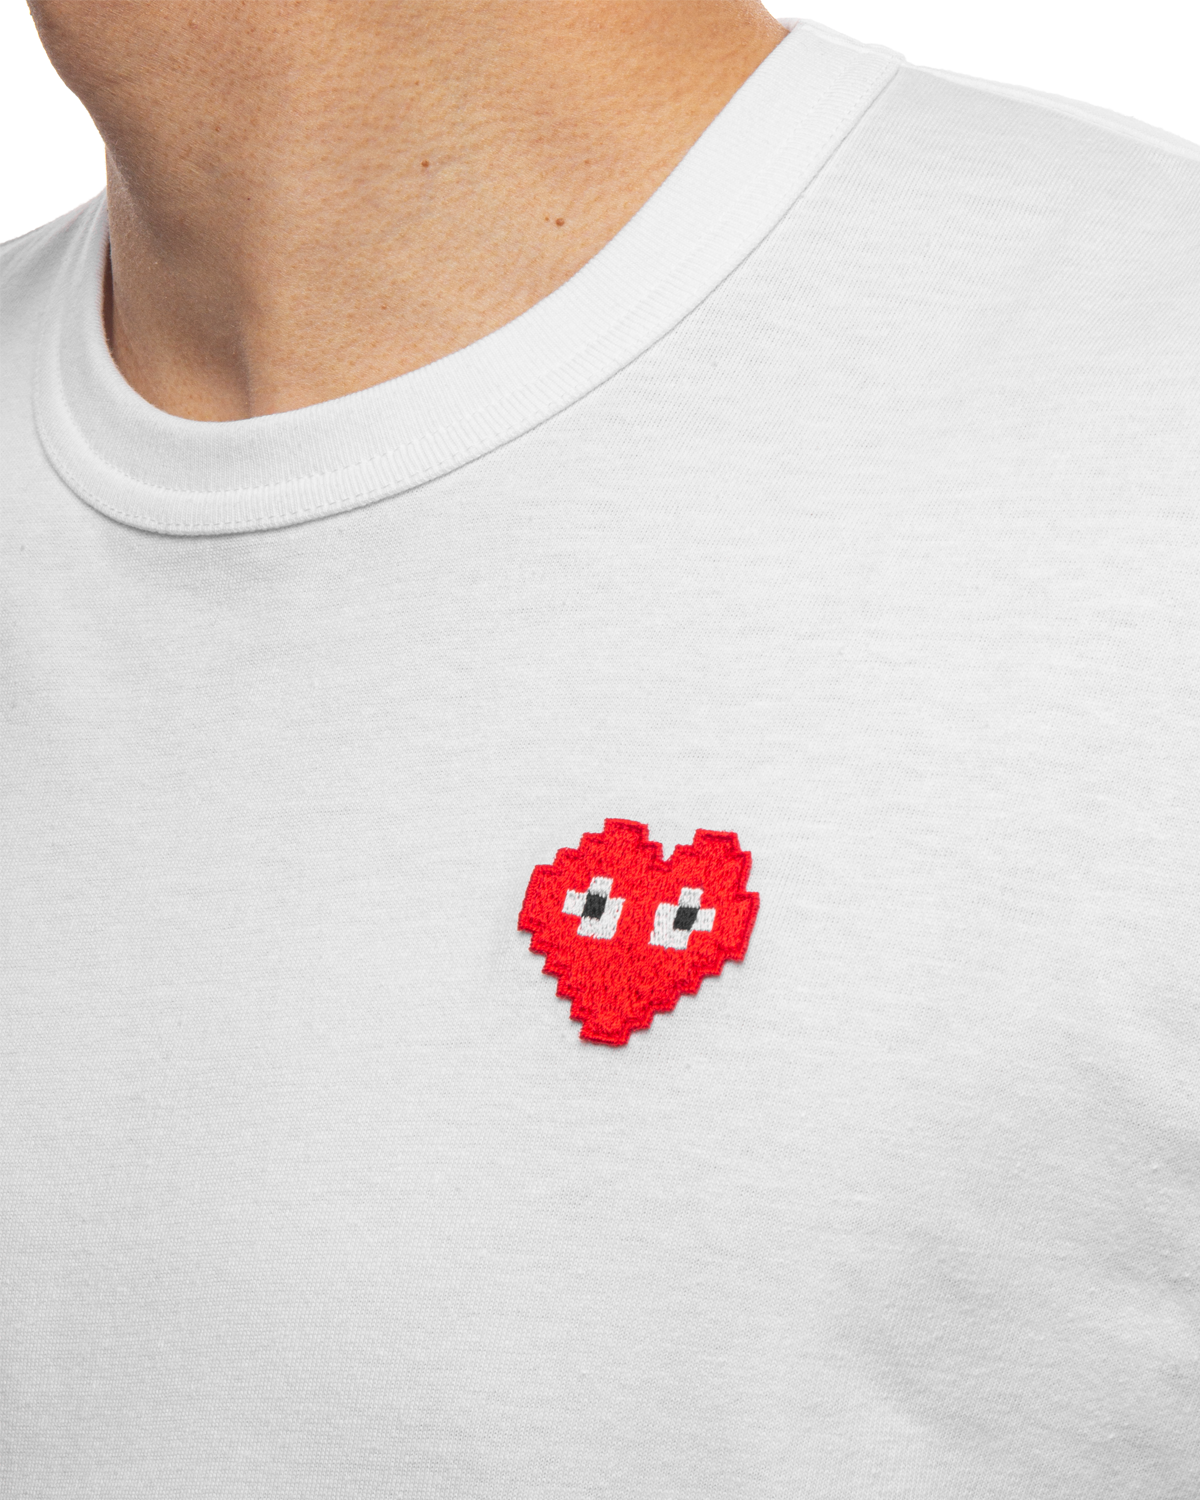 PLAY Invader Pixel Heart T-Shirt White